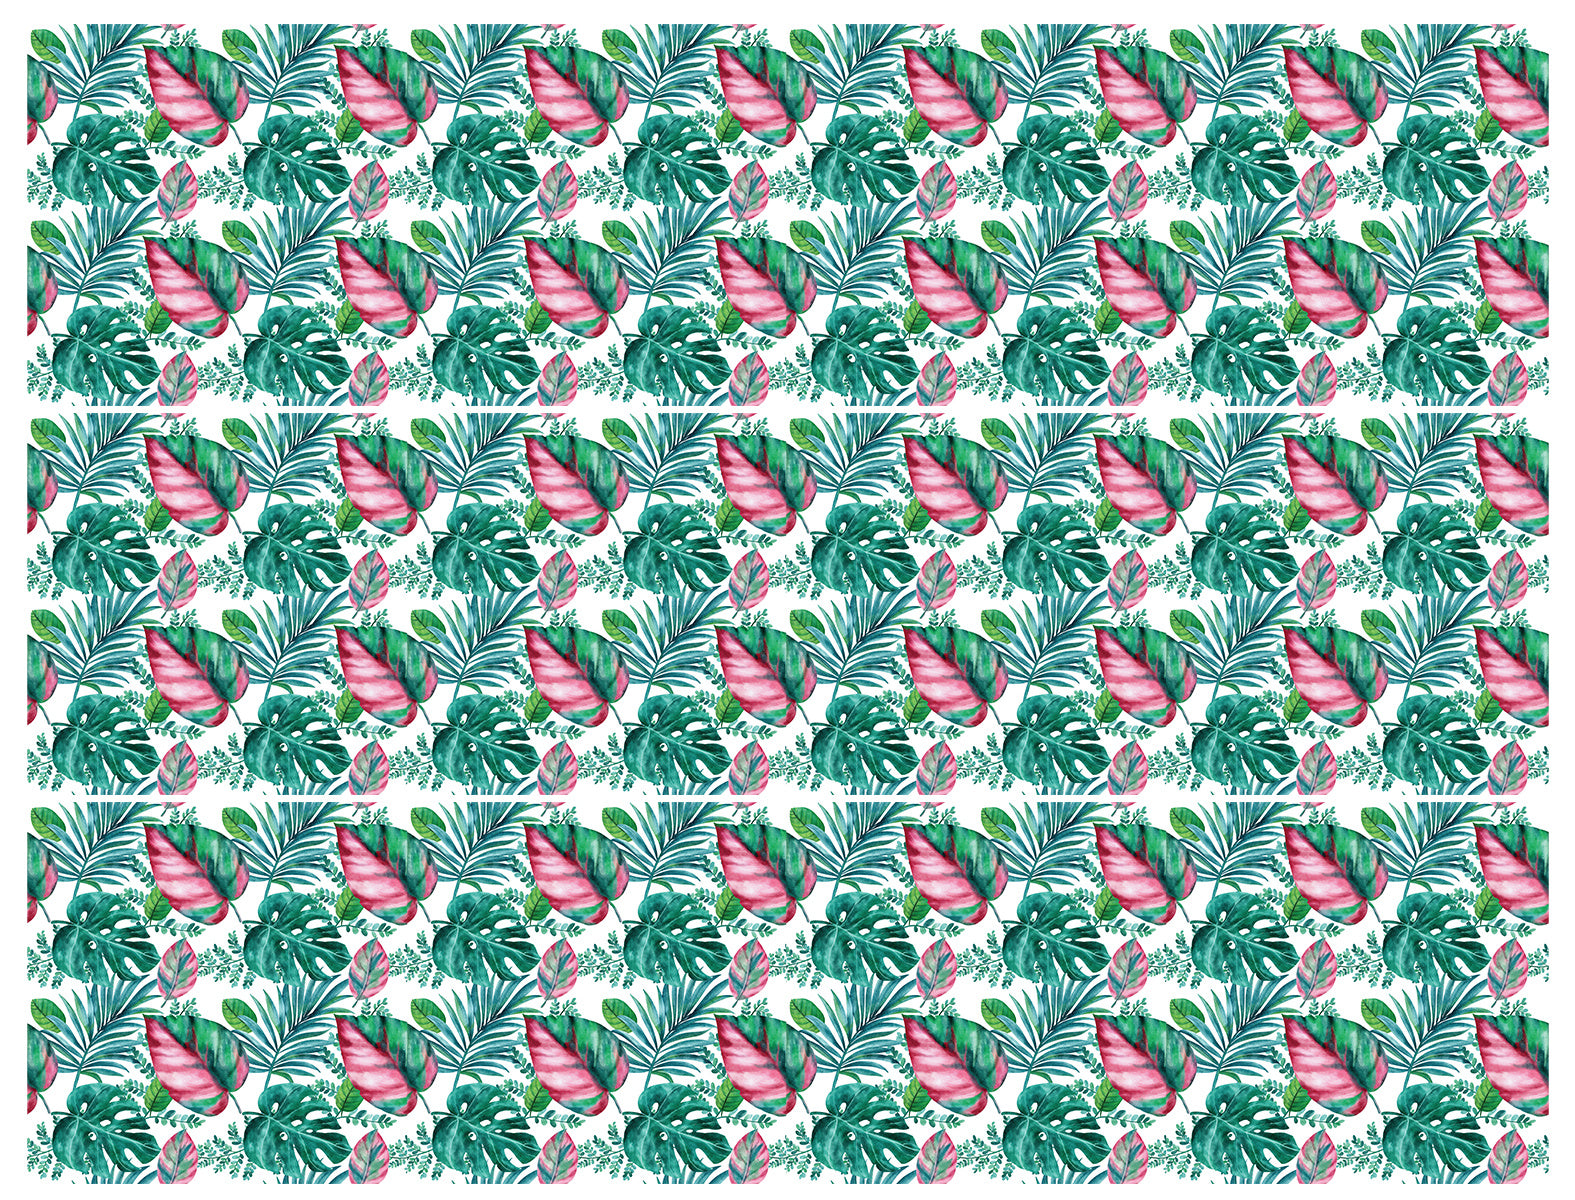 Tropical Leaves Pink and Green Pattern Edible Cake Topper Image Strips ABPID56662